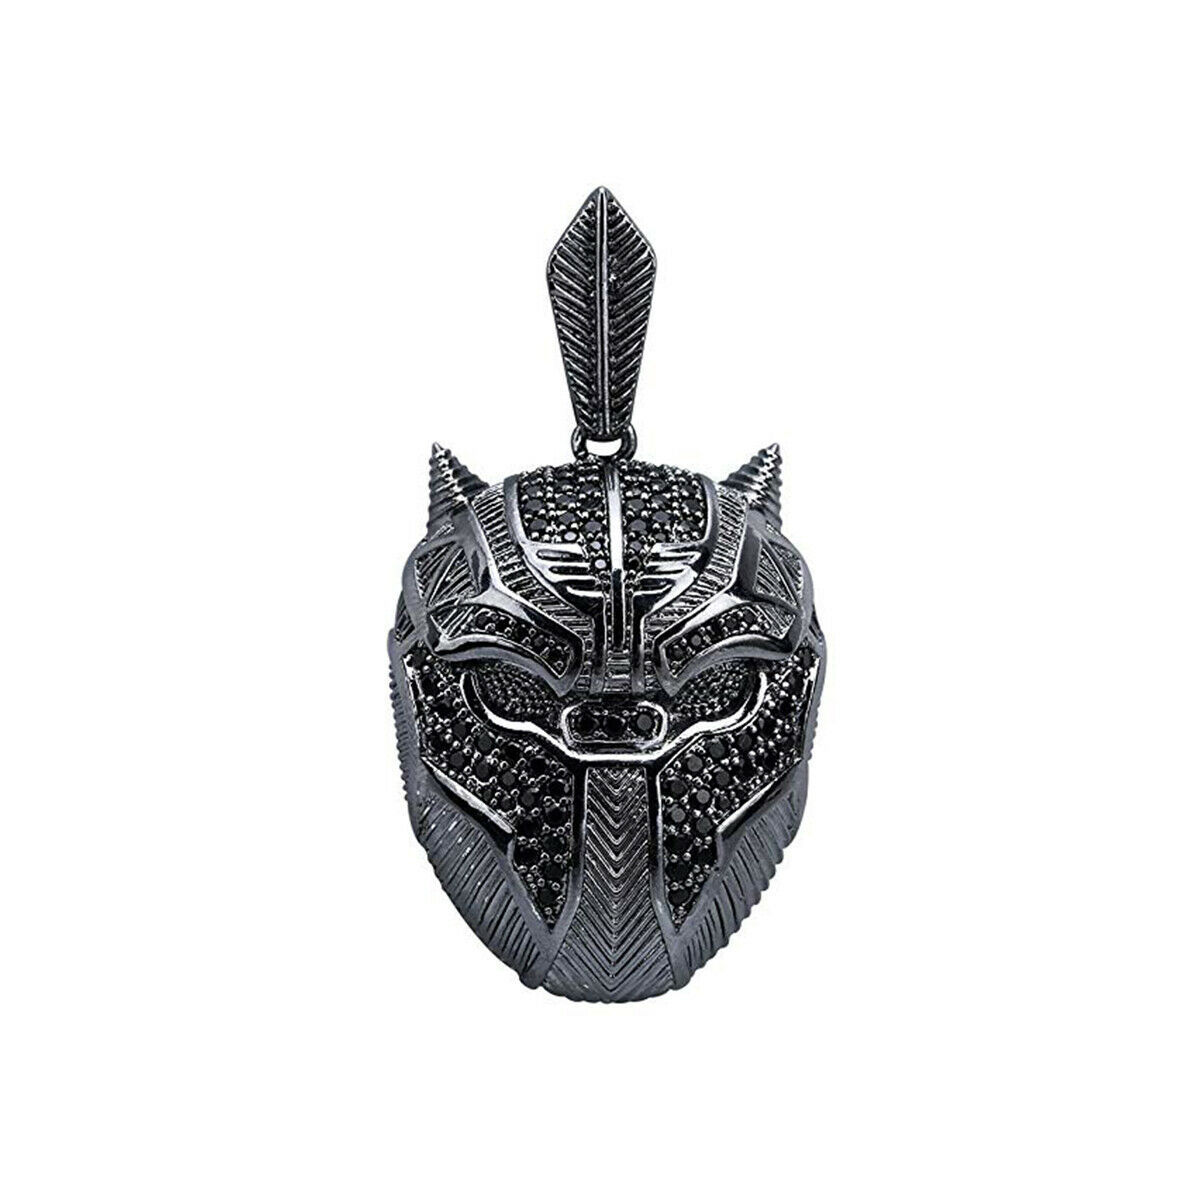 Stainless Steel Black and Brown Resin Panther Face Necklace